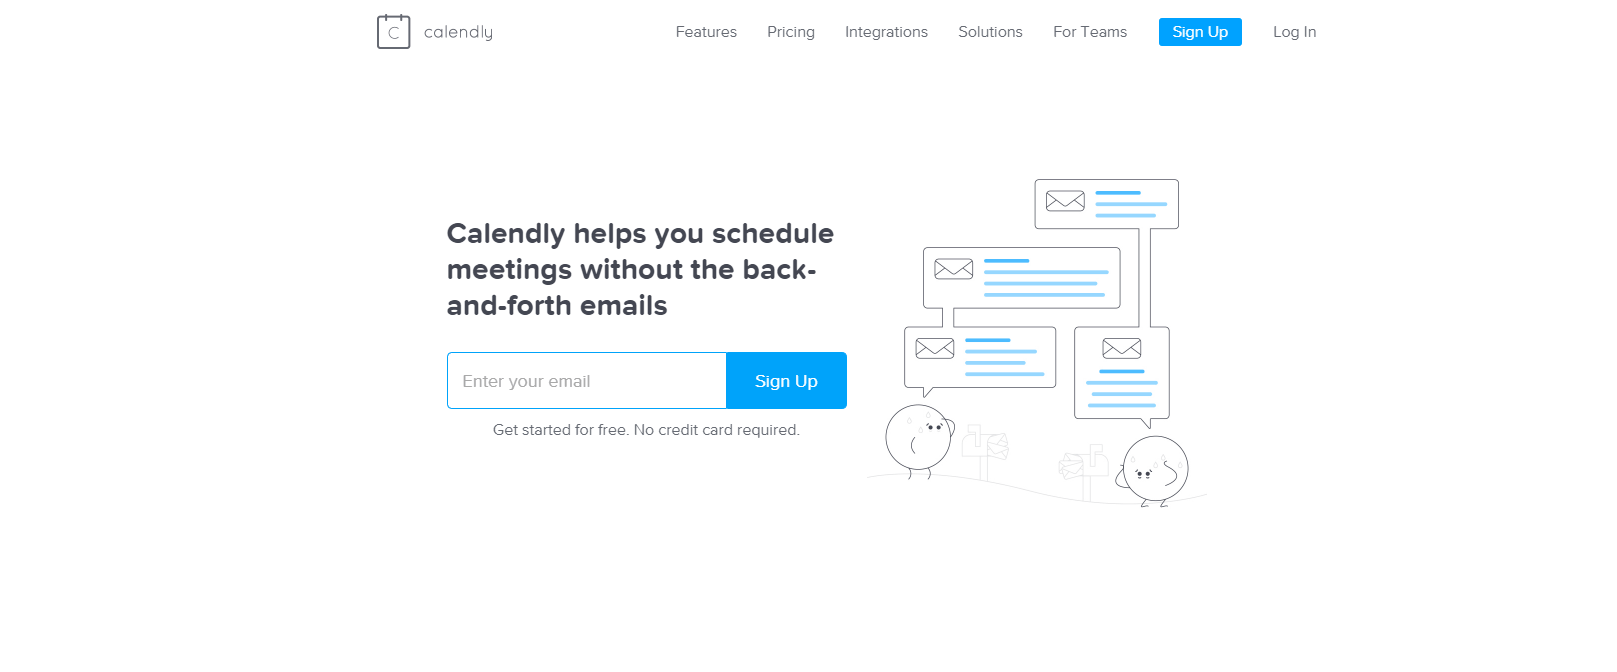 Quickly schedule meetings with Calendly